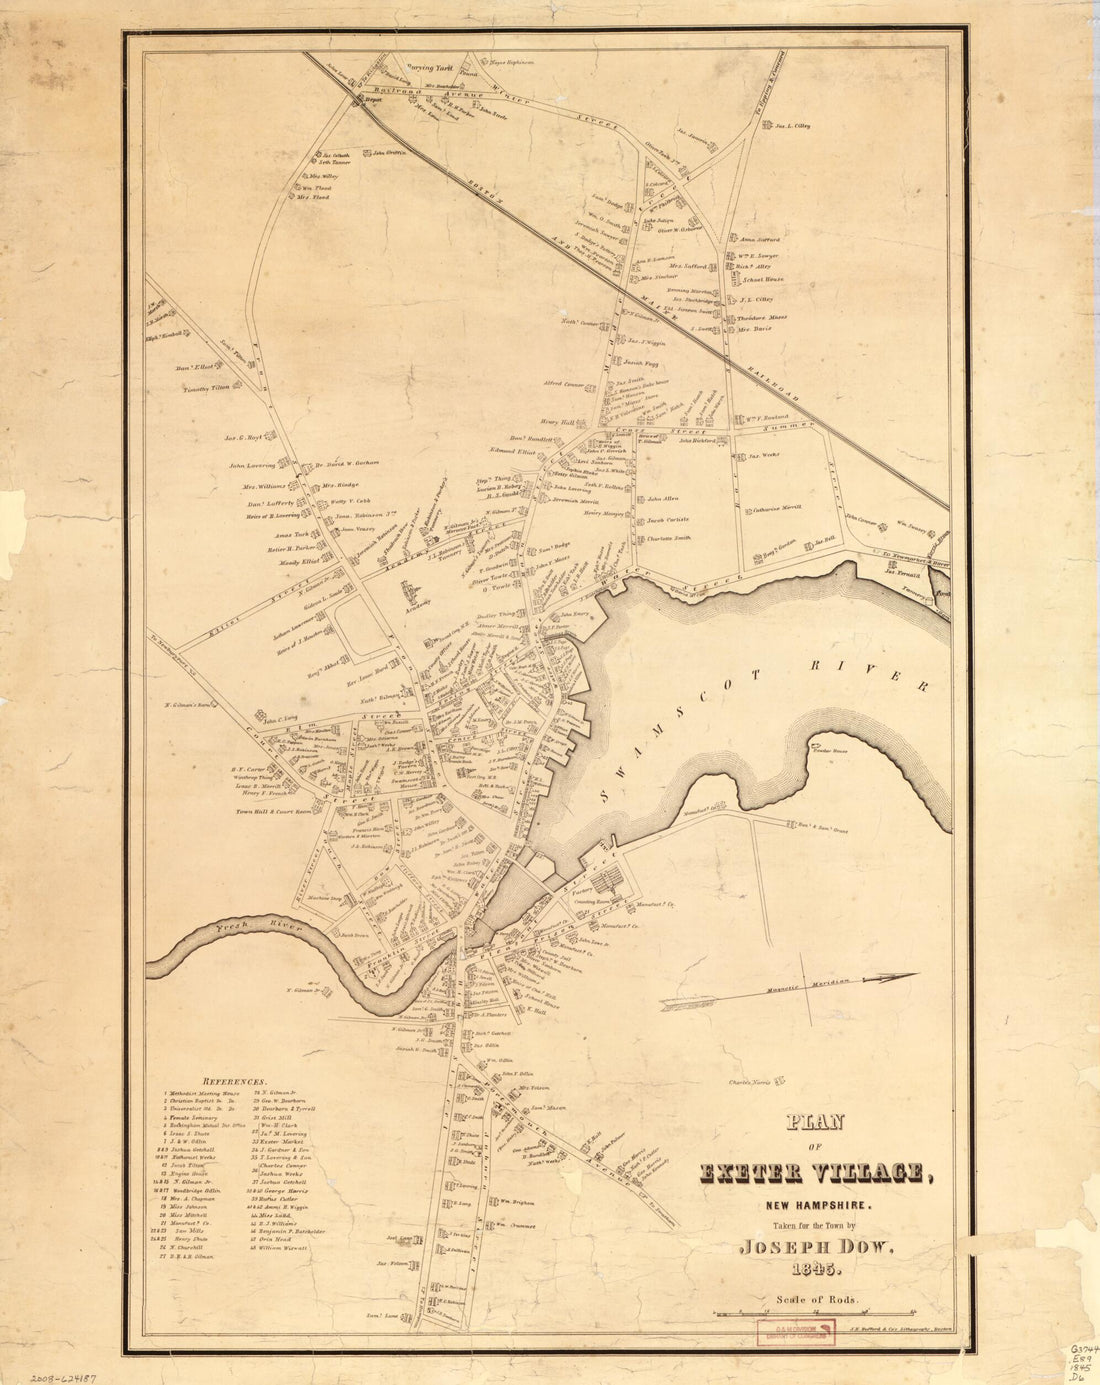 This old map of Plan of Exeter Village, New Hampshire from 1845 was created by Joseph Dow,  J.H. Bufford &amp; Co in 1845